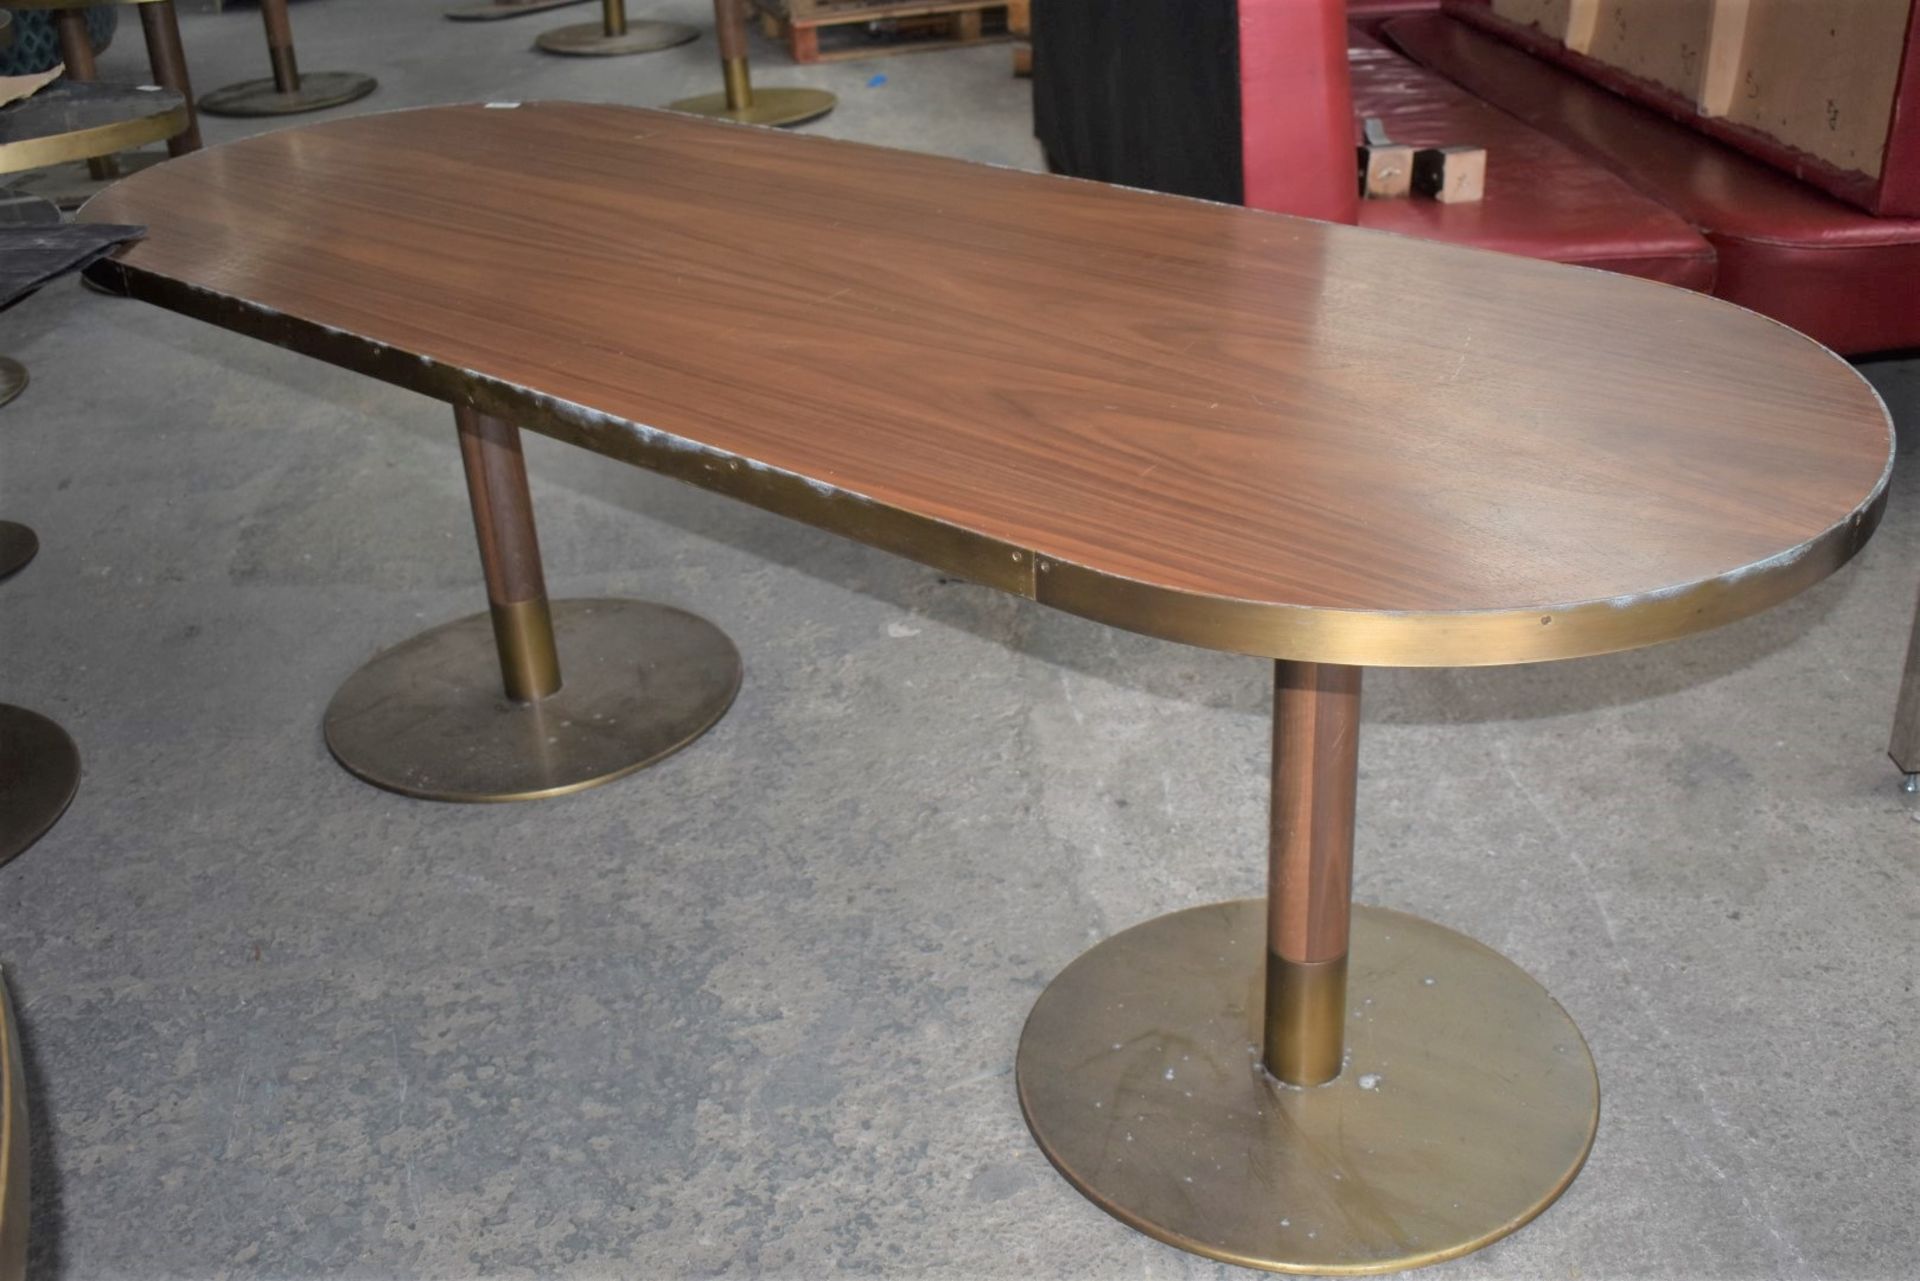 1 x Oval Banqueting Dining Table By AKP Design Athens - Walnut Top With Antique Brass Edging - Image 15 of 16